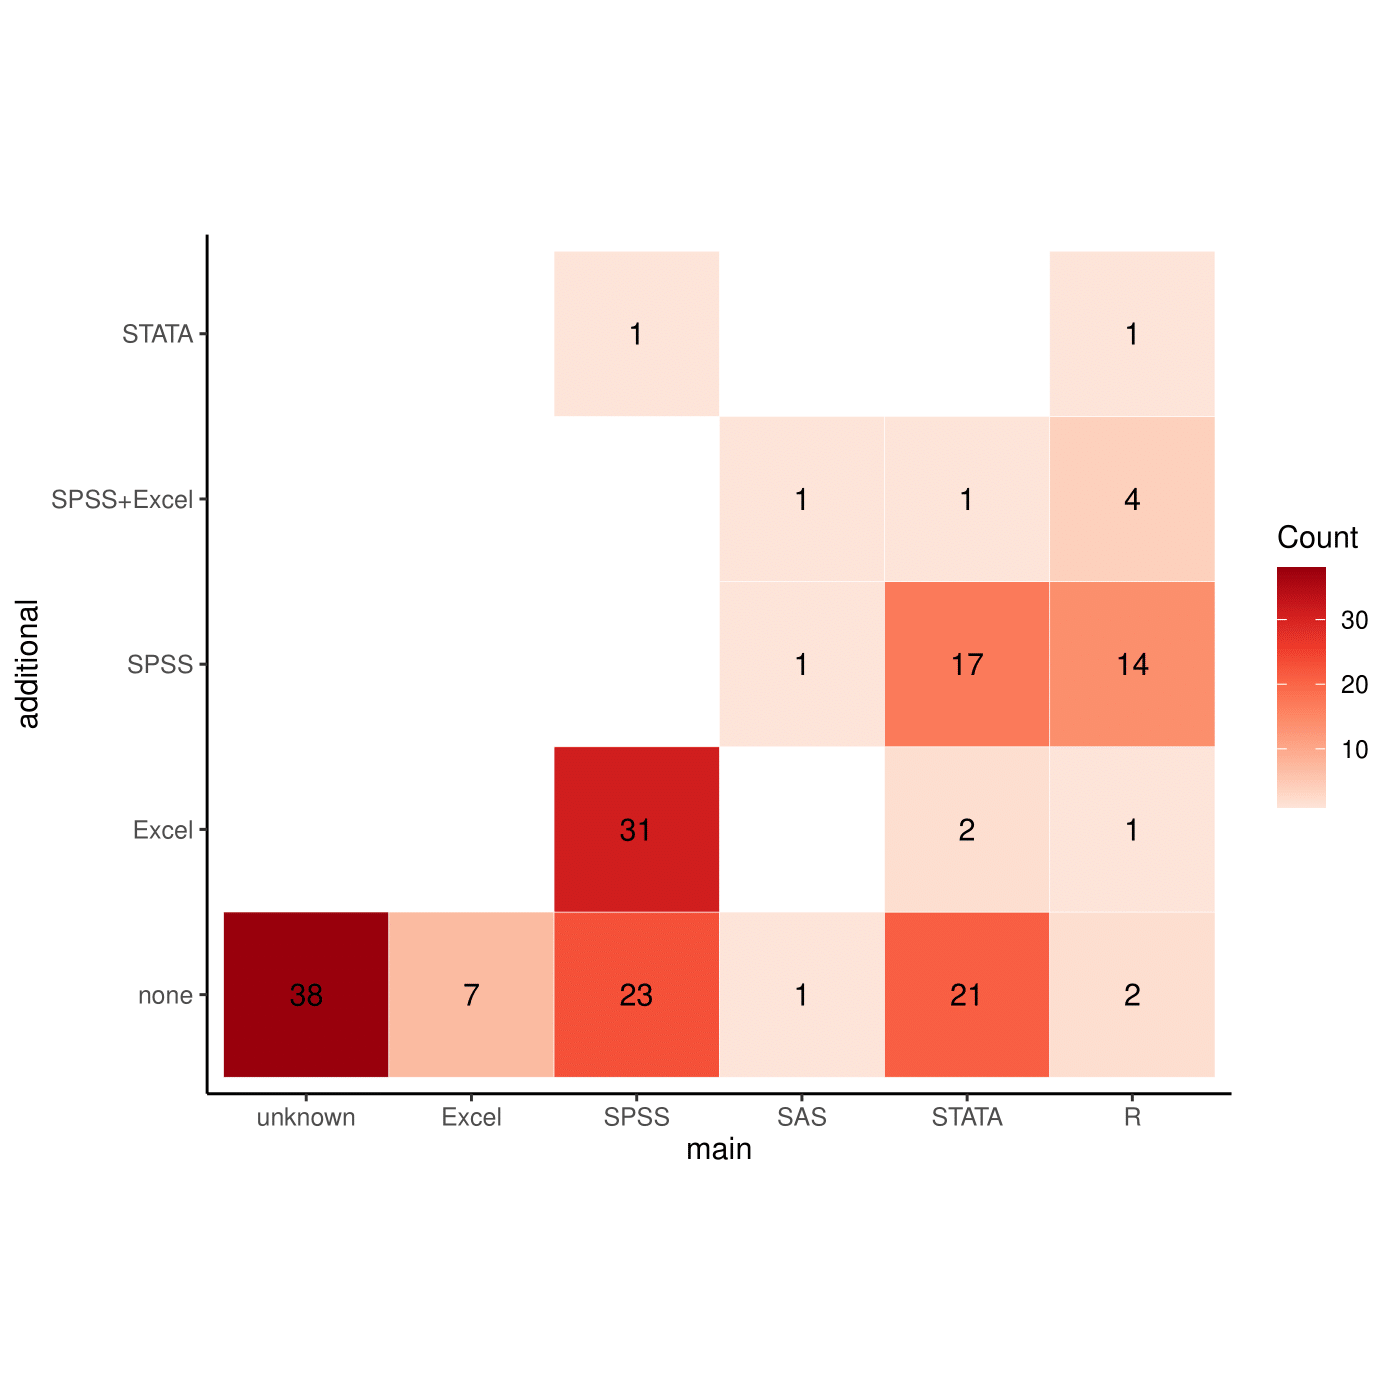 Heatmap of type of software usage